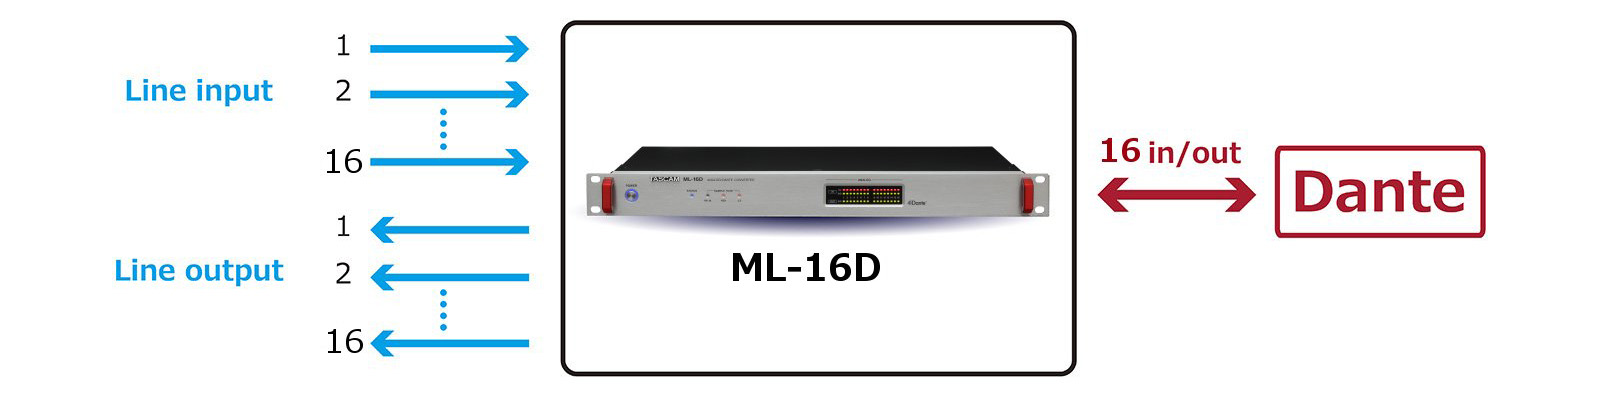 The TASCAM ML-16D makes it possible to transmit 16-channel analog line input/output signals